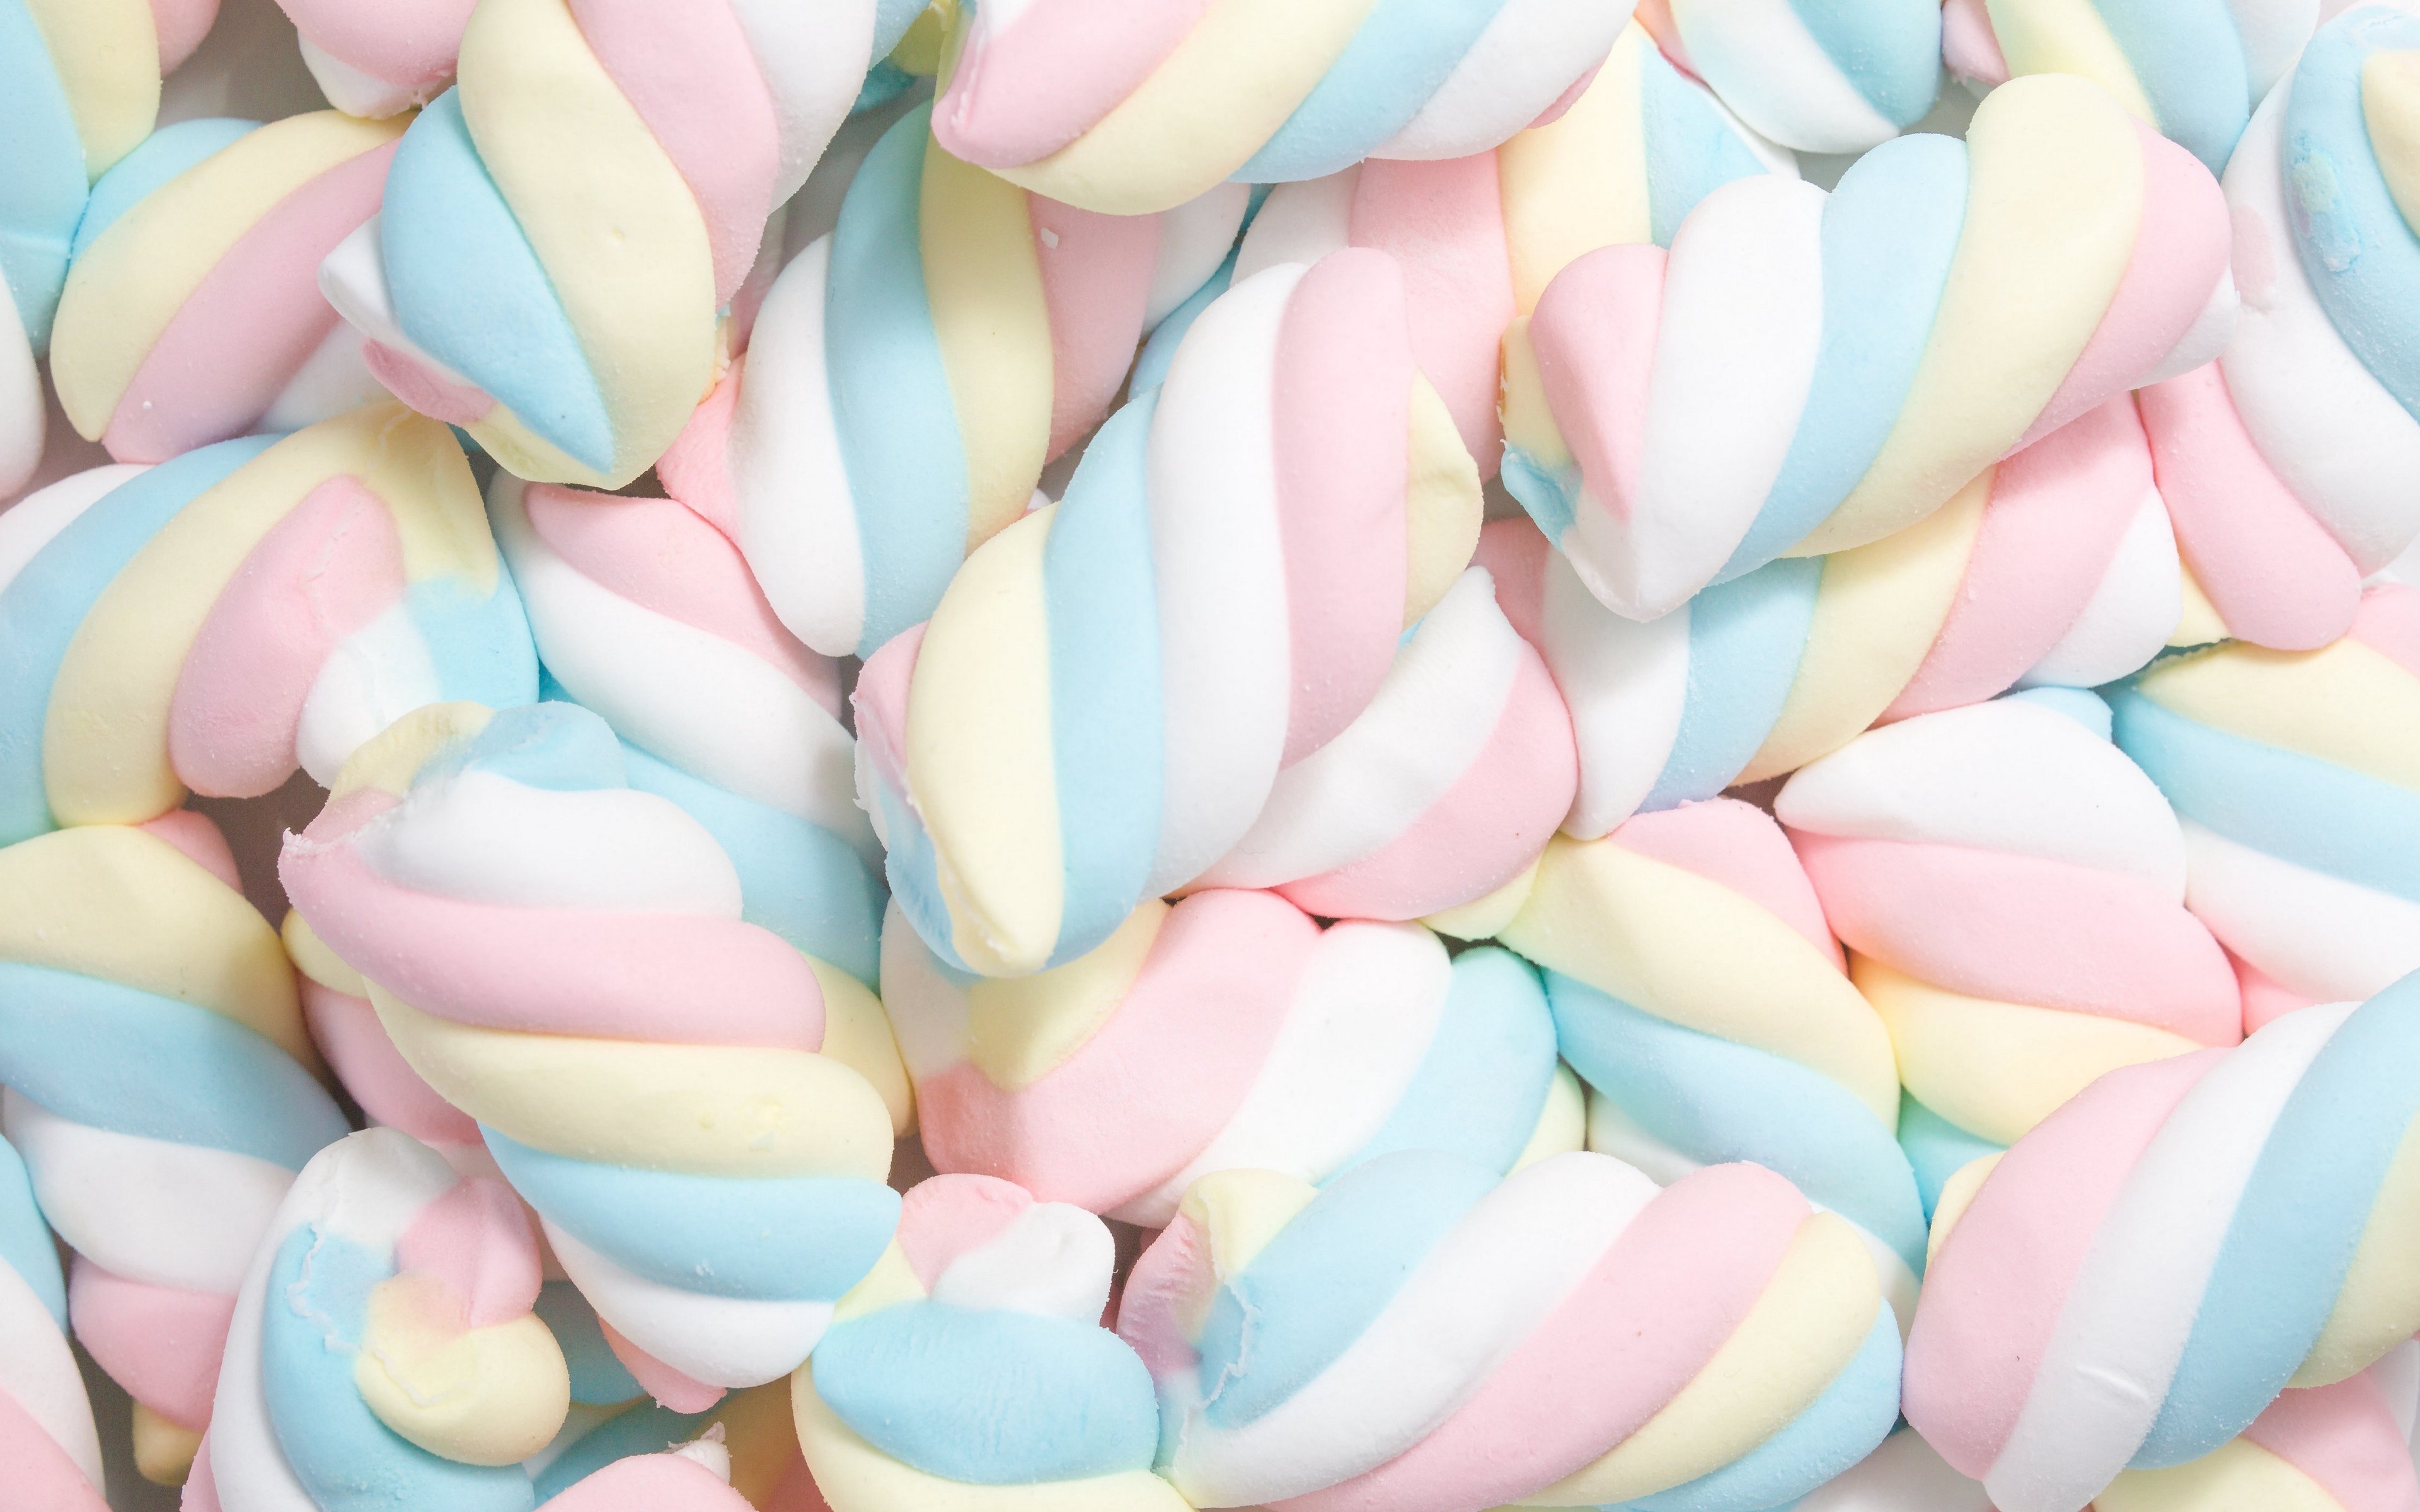 Wallpaper Pink Yellow and White Heart Shaped Candies, Background Free Image